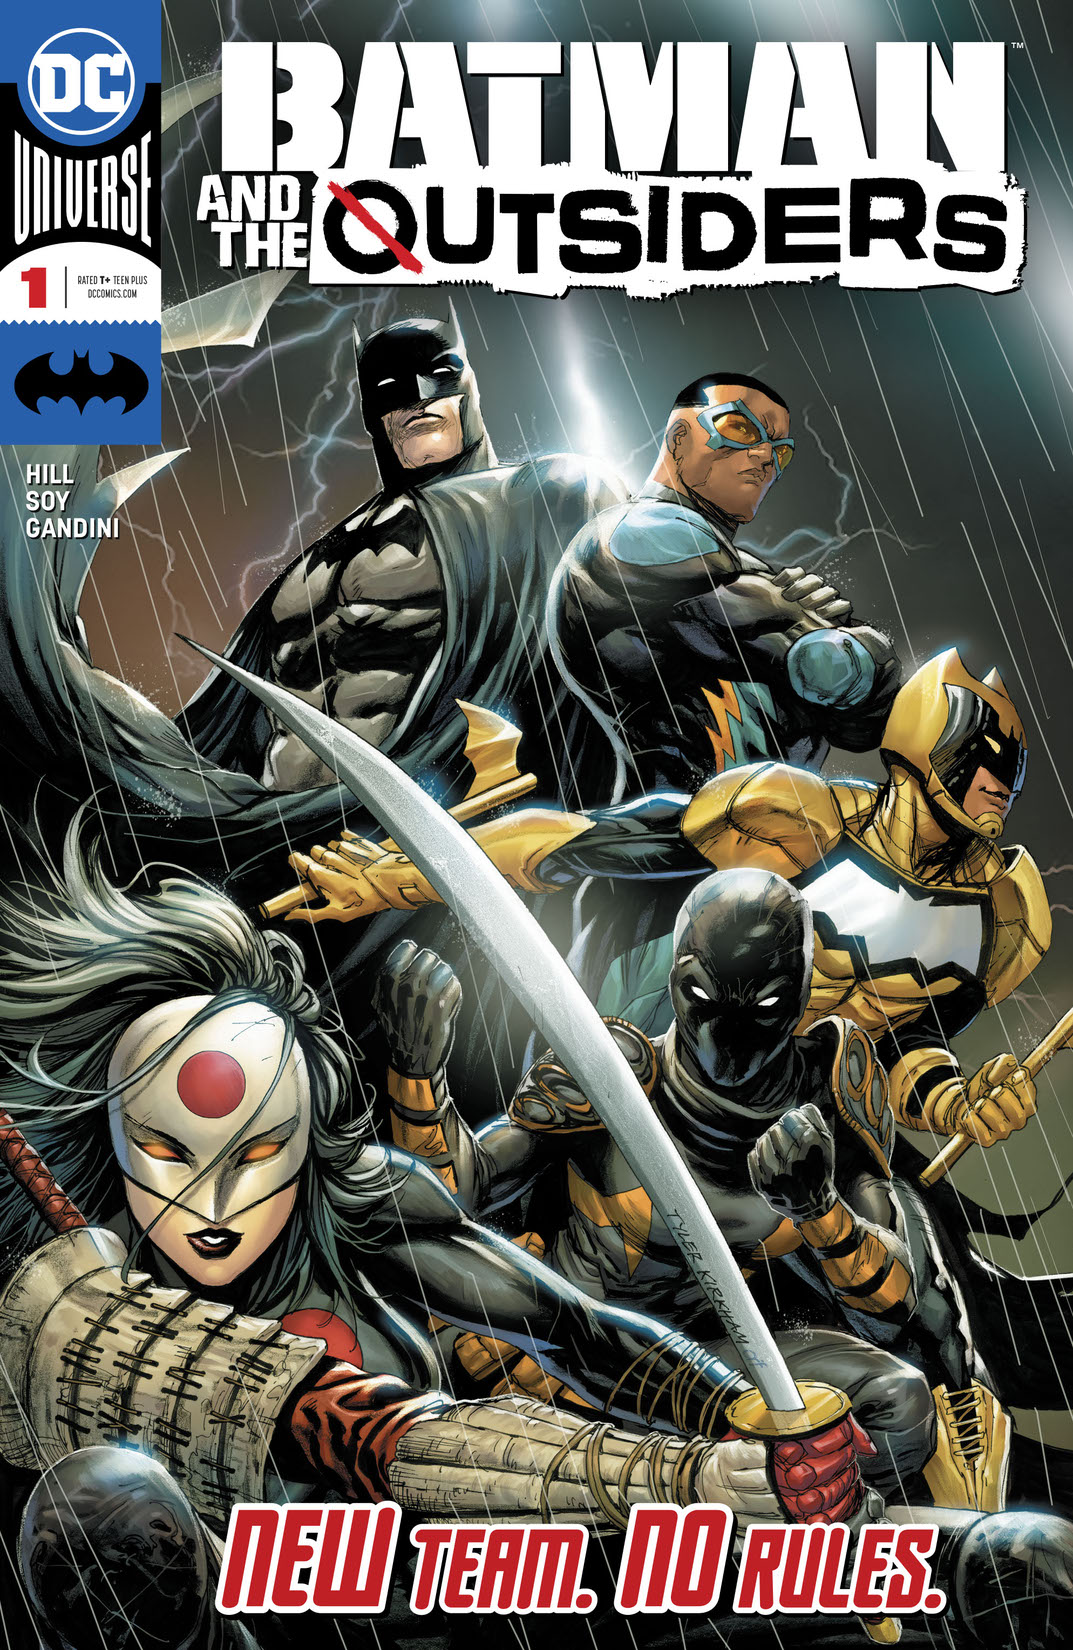 Batman & the Outsiders (2019-) #1 preview images